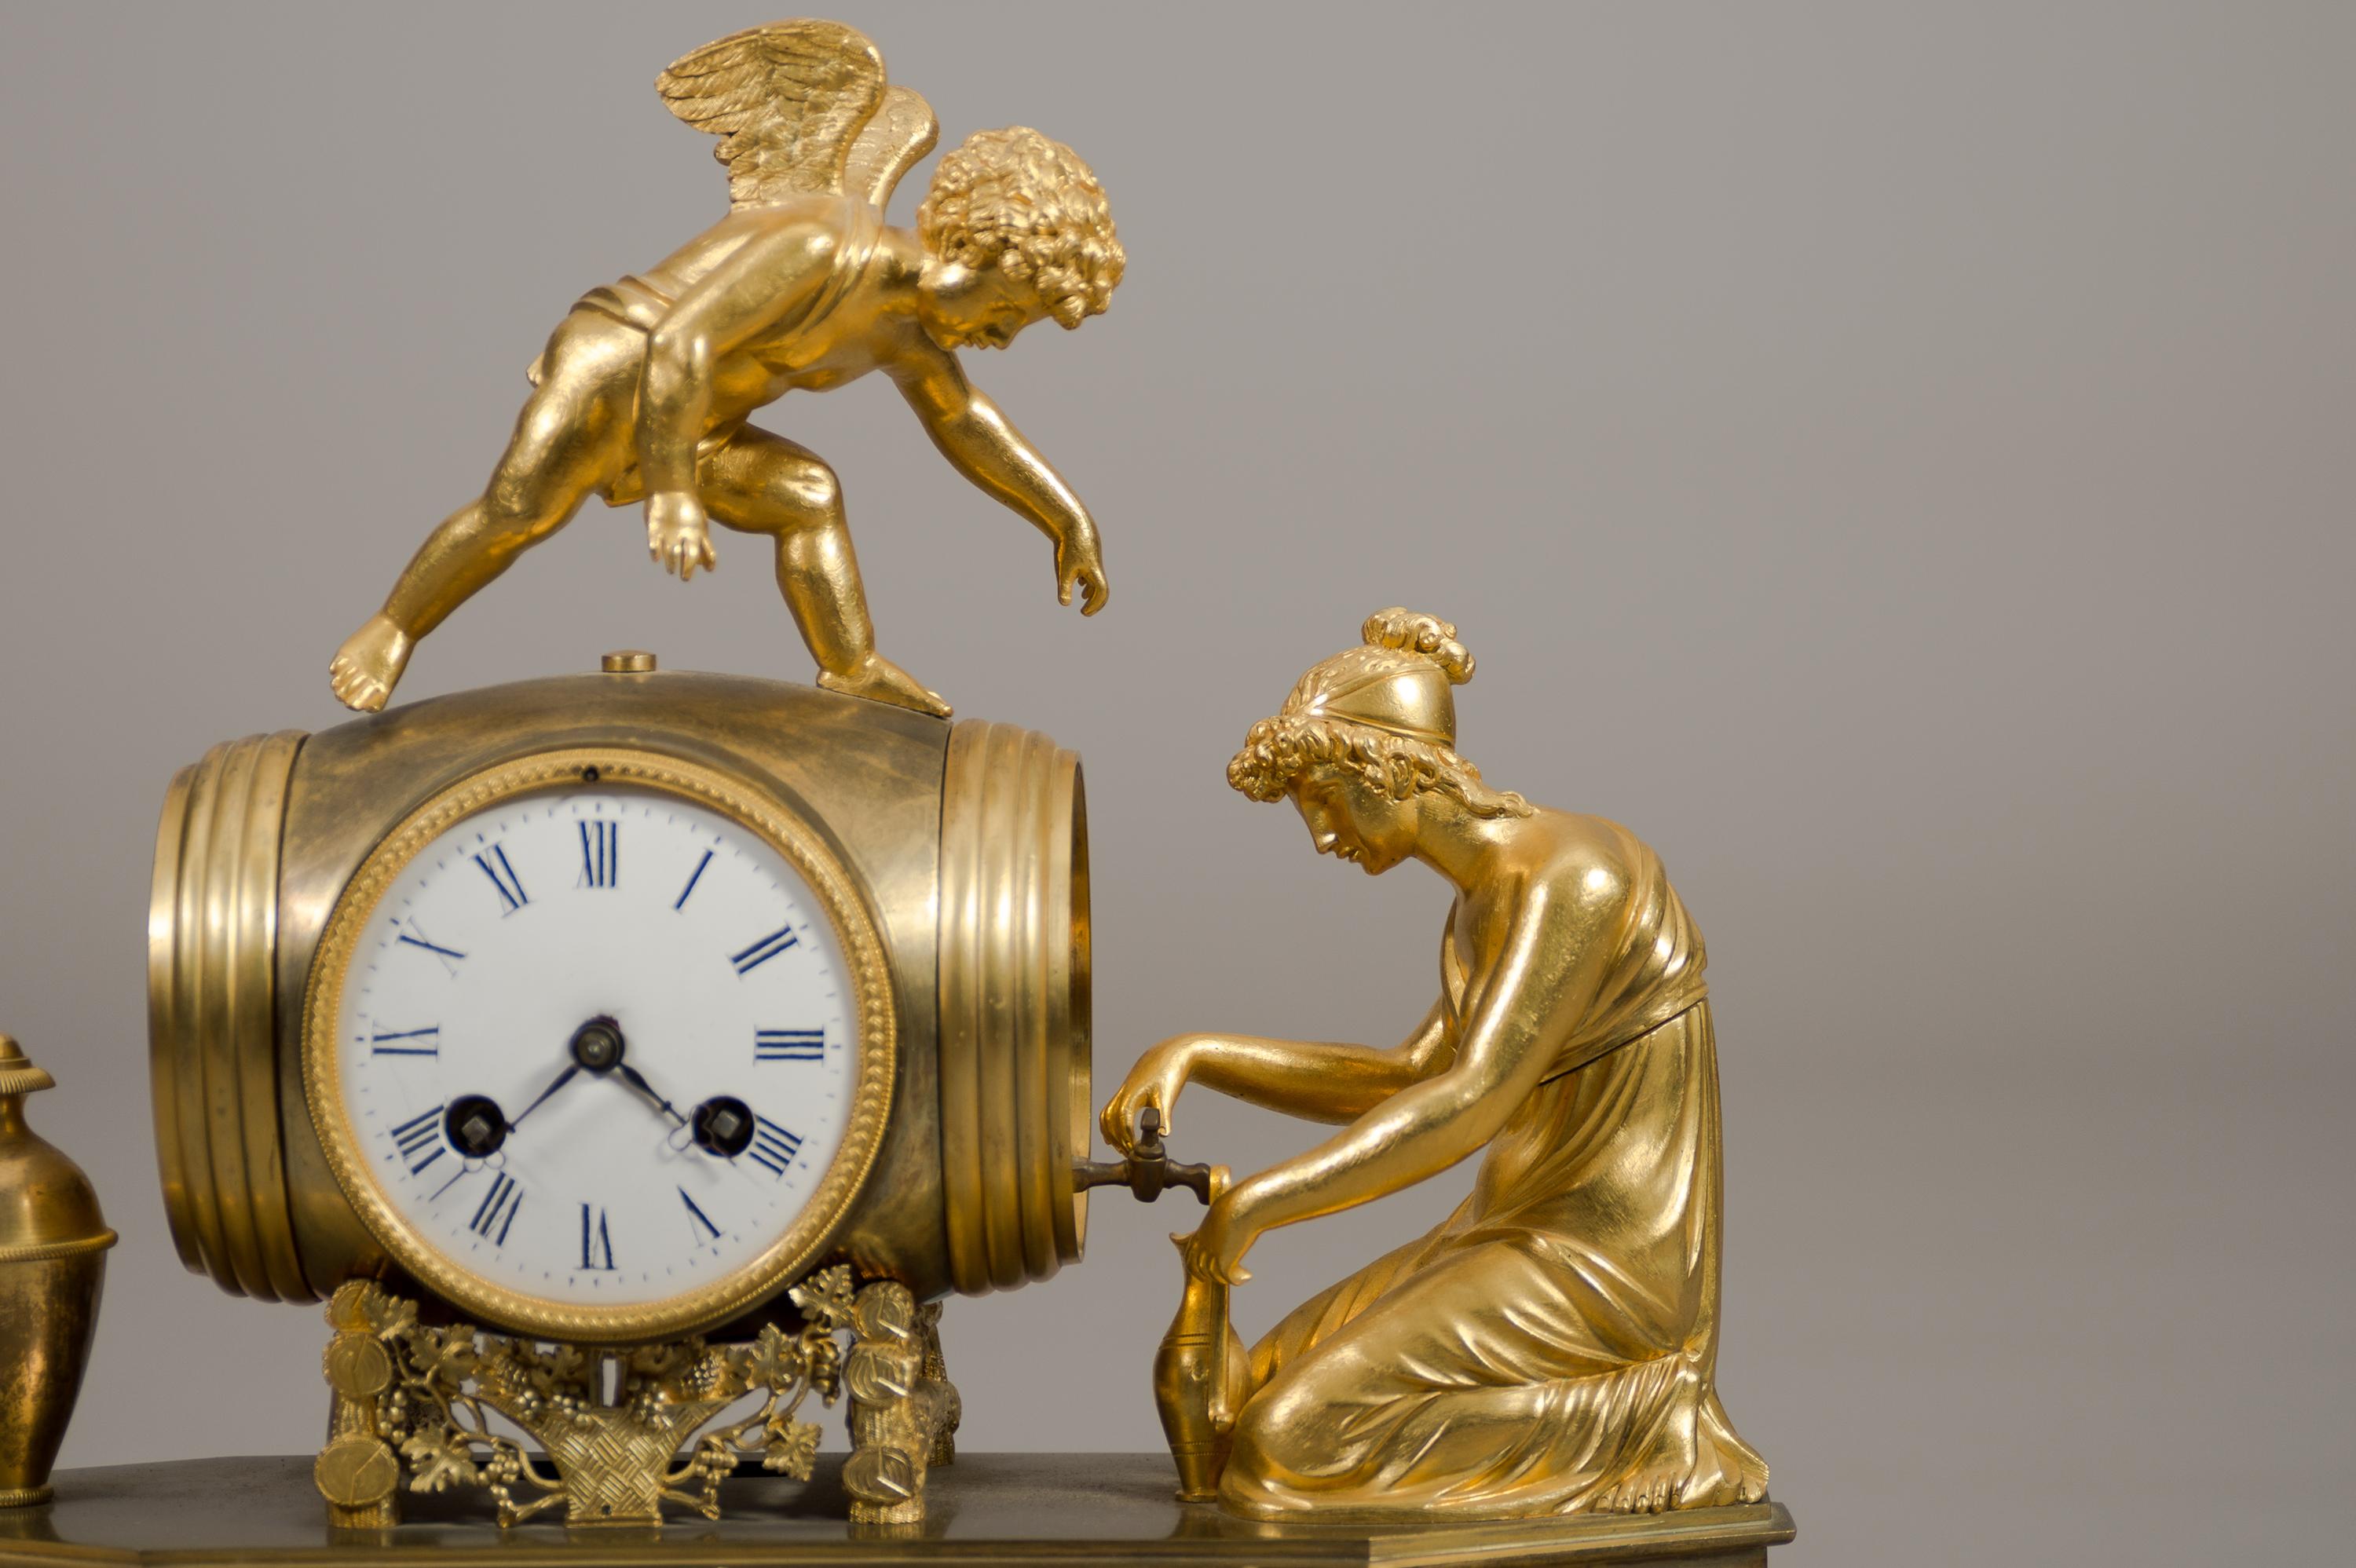 A fine Early 19th century French Empire ormolu bronze mantel clock. 

Depicting a winged cherub standing atop a barrel while a kneeling lady pouring wine into a vase. Having a white enamel dial with Roman numerals, and a movement with a silk wire